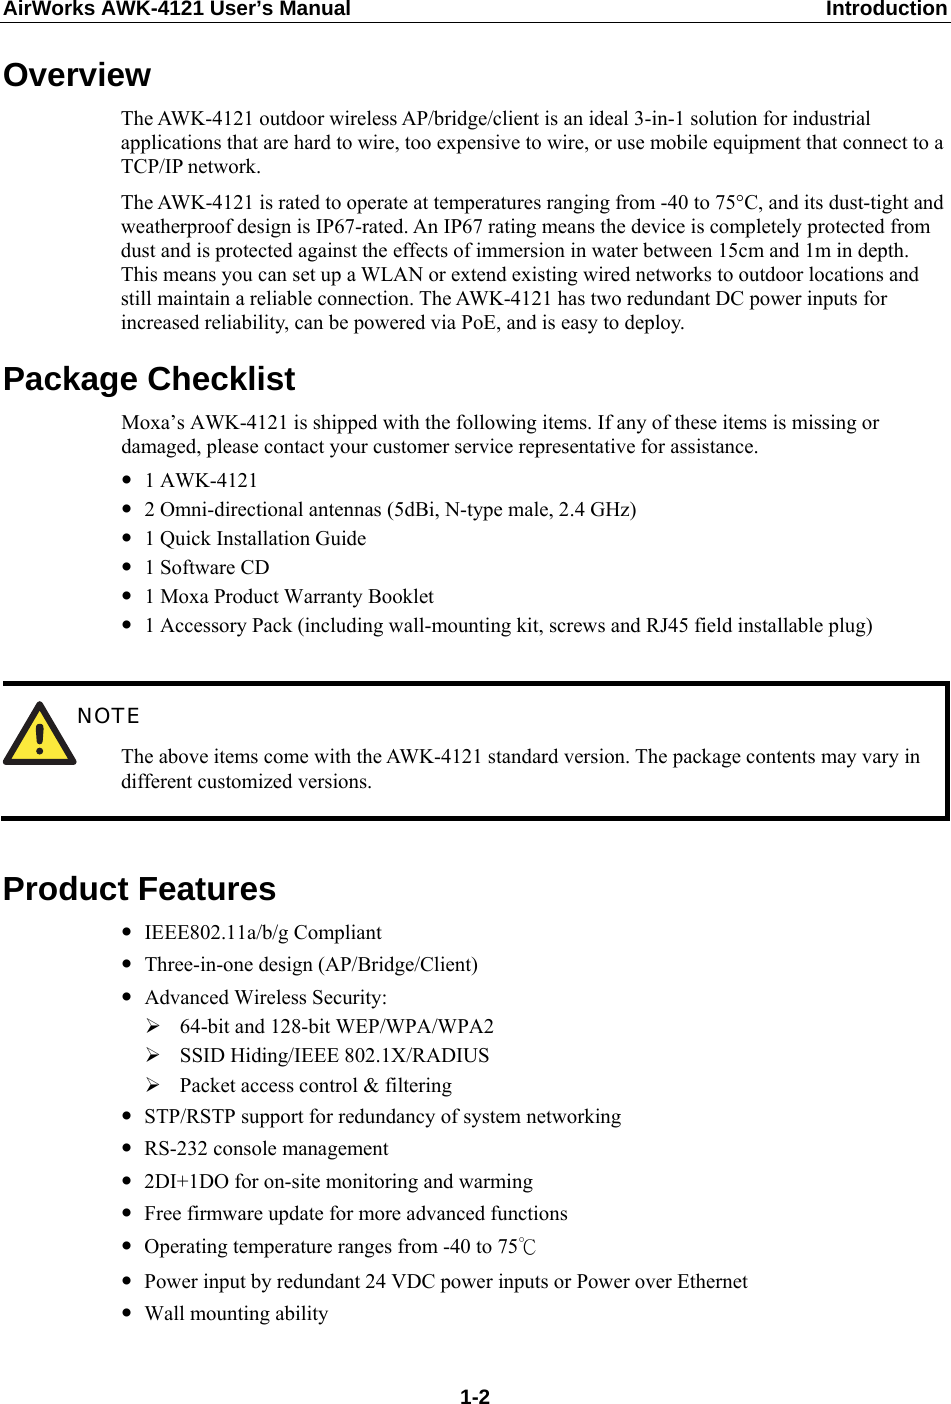 AirWorks AWK-4121 User’s Manual  Introduction Overview The AWK-4121 outdoor wireless AP/bridge/client is an ideal 3-in-1 solution for industrial applications that are hard to wire, too expensive to wire, or use mobile equipment that connect to a TCP/IP network.   The AWK-4121 is rated to operate at temperatures ranging from -40 to 75°C, and its dust-tight and weatherproof design is IP67-rated. An IP67 rating means the device is completely protected from dust and is protected against the effects of immersion in water between 15cm and 1m in depth. This means you can set up a WLAN or extend existing wired networks to outdoor locations and still maintain a reliable connection. The AWK-4121 has two redundant DC power inputs for increased reliability, can be powered via PoE, and is easy to deploy.   Package Checklist Moxa’s AWK-4121 is shipped with the following items. If any of these items is missing or damaged, please contact your customer service representative for assistance. y 1 AWK-4121 y 2 Omni-directional antennas (5dBi, N-type male, 2.4 GHz) y 1 Quick Installation Guide y 1 Software CD y 1 Moxa Product Warranty Booklet y 1 Accessory Pack (including wall-mounting kit, screws and RJ45 field installable plug)   NOTE The above items come with the AWK-4121 standard version. The package contents may vary in different customized versions.  Product Features y IEEE802.11a/b/g Compliant y Three-in-one design (AP/Bridge/Client) y Advanced Wireless Security: ¾ 64-bit and 128-bit WEP/WPA/WPA2 ¾ SSID Hiding/IEEE 802.1X/RADIUS ¾ Packet access control &amp; filtering y STP/RSTP support for redundancy of system networking y RS-232 console management y 2DI+1DO for on-site monitoring and warming y Free firmware update for more advanced functions y Operating temperature ranges from -40 to 75℃ y Power input by redundant 24 VDC power inputs or Power over Ethernet y Wall mounting ability  1-2